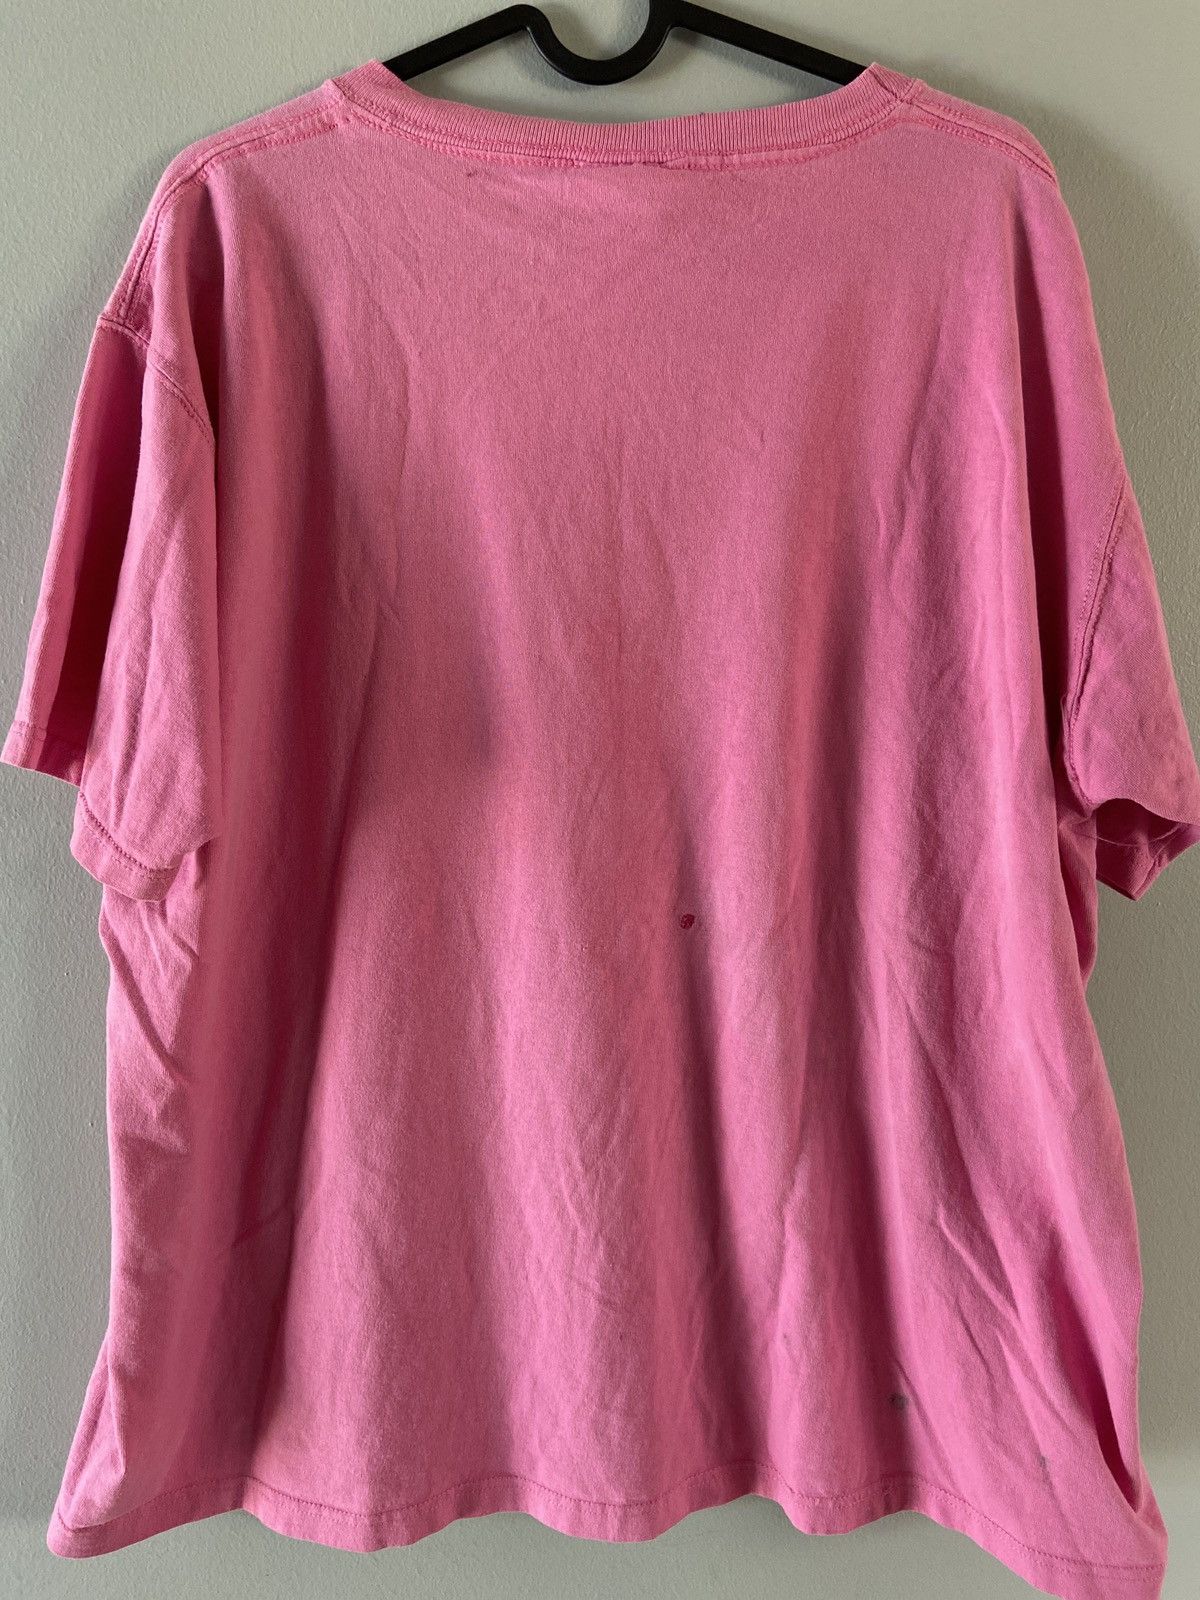 Mickey Mouse Vintage Pink Mickey Mouse Tee Size US M / EU 48-50 / 2 - 2 Preview